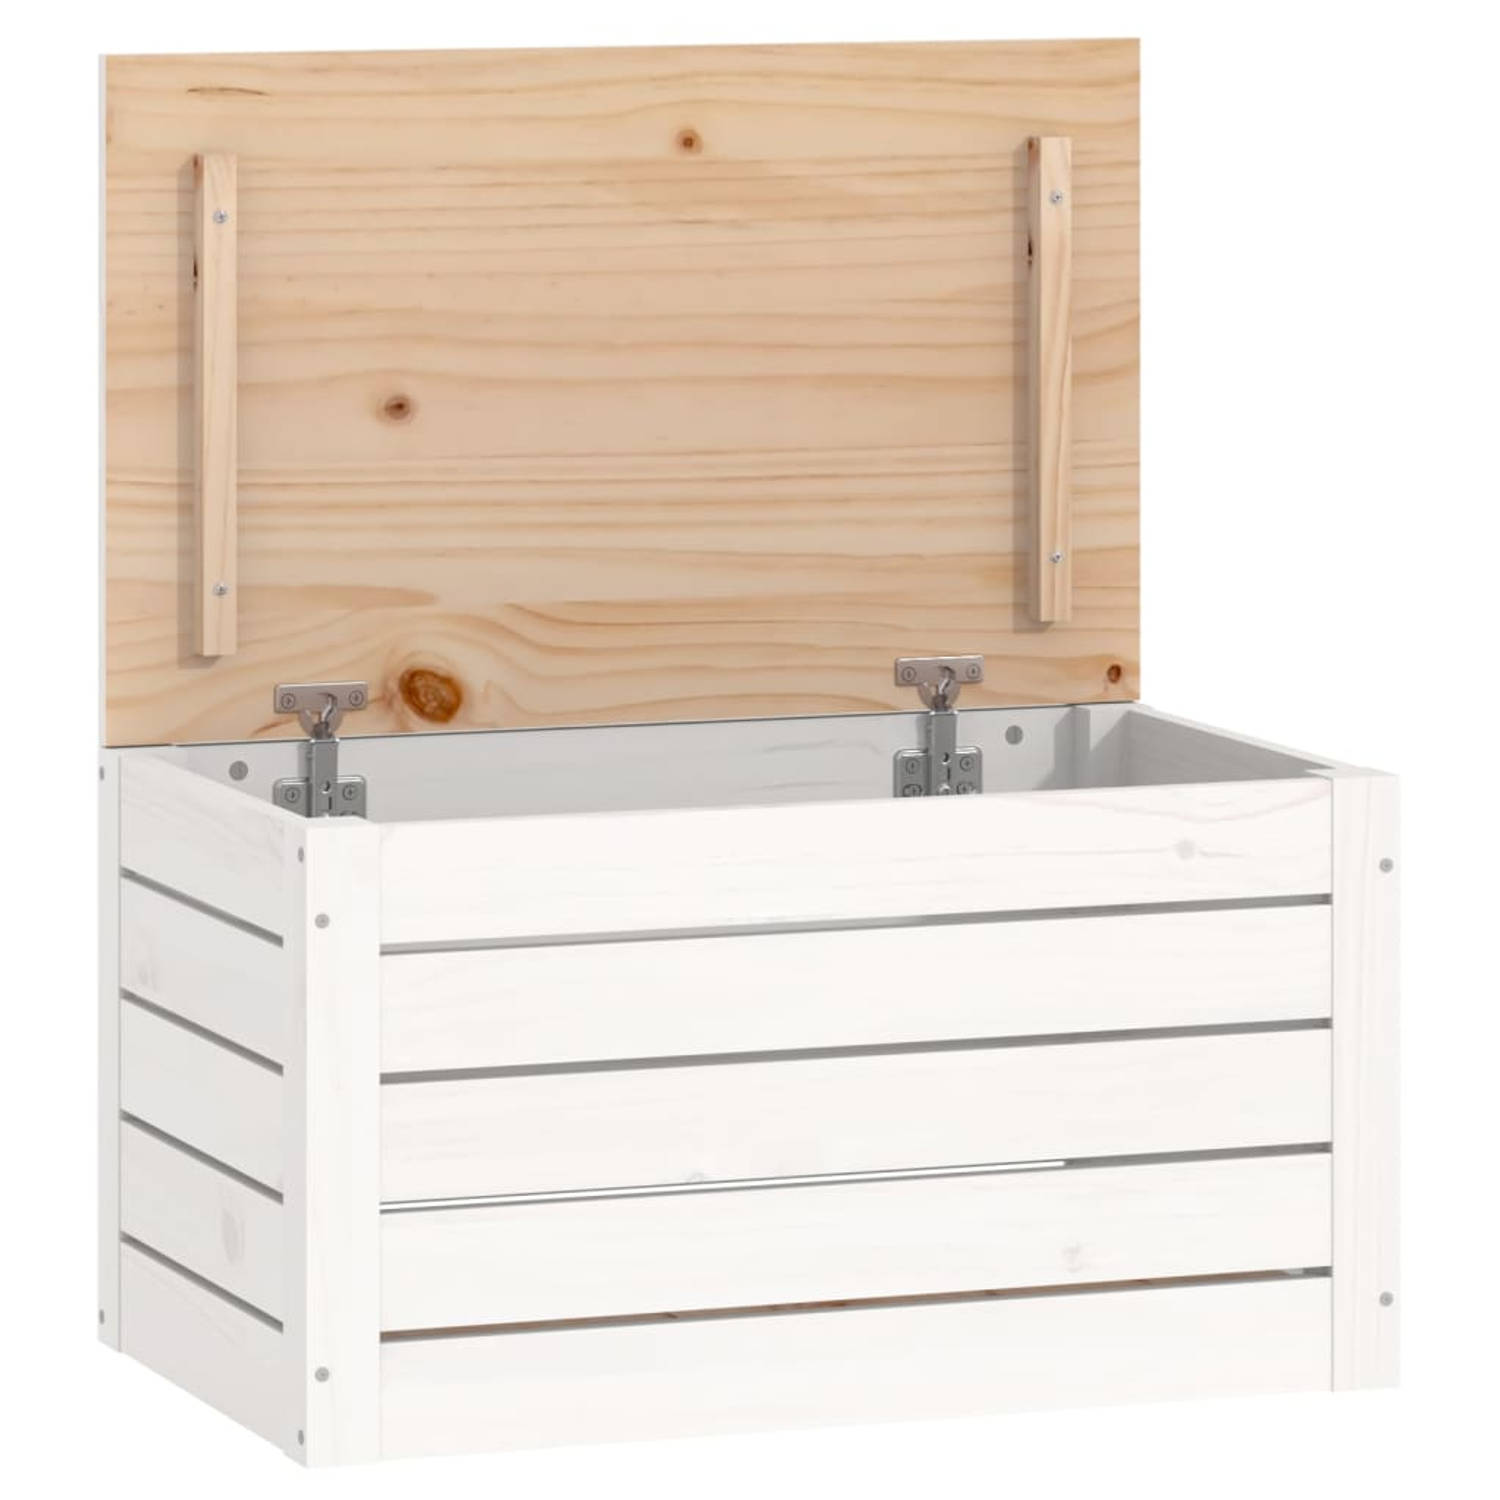 The Living Store Opbergbox wit 59-5x36-5x33 cm massief grenenhout - Kast